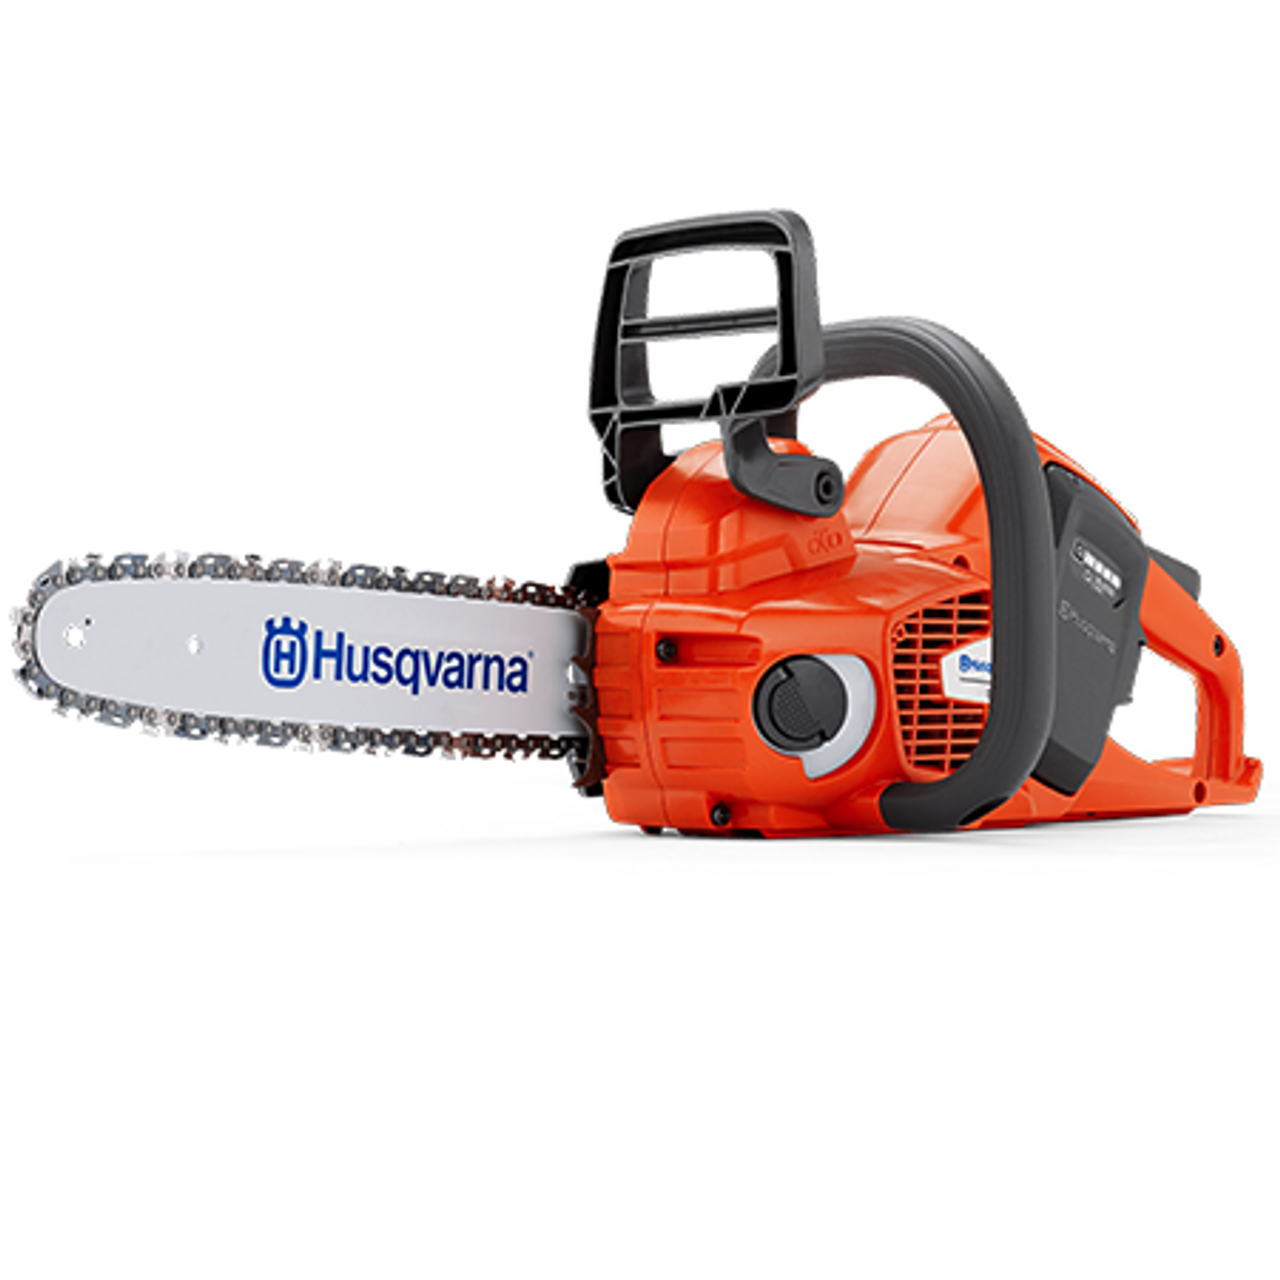 Tempest Husqvarna 535i XP Battery Powered Fire Rescue Chain Saw | Tools | FirePenny